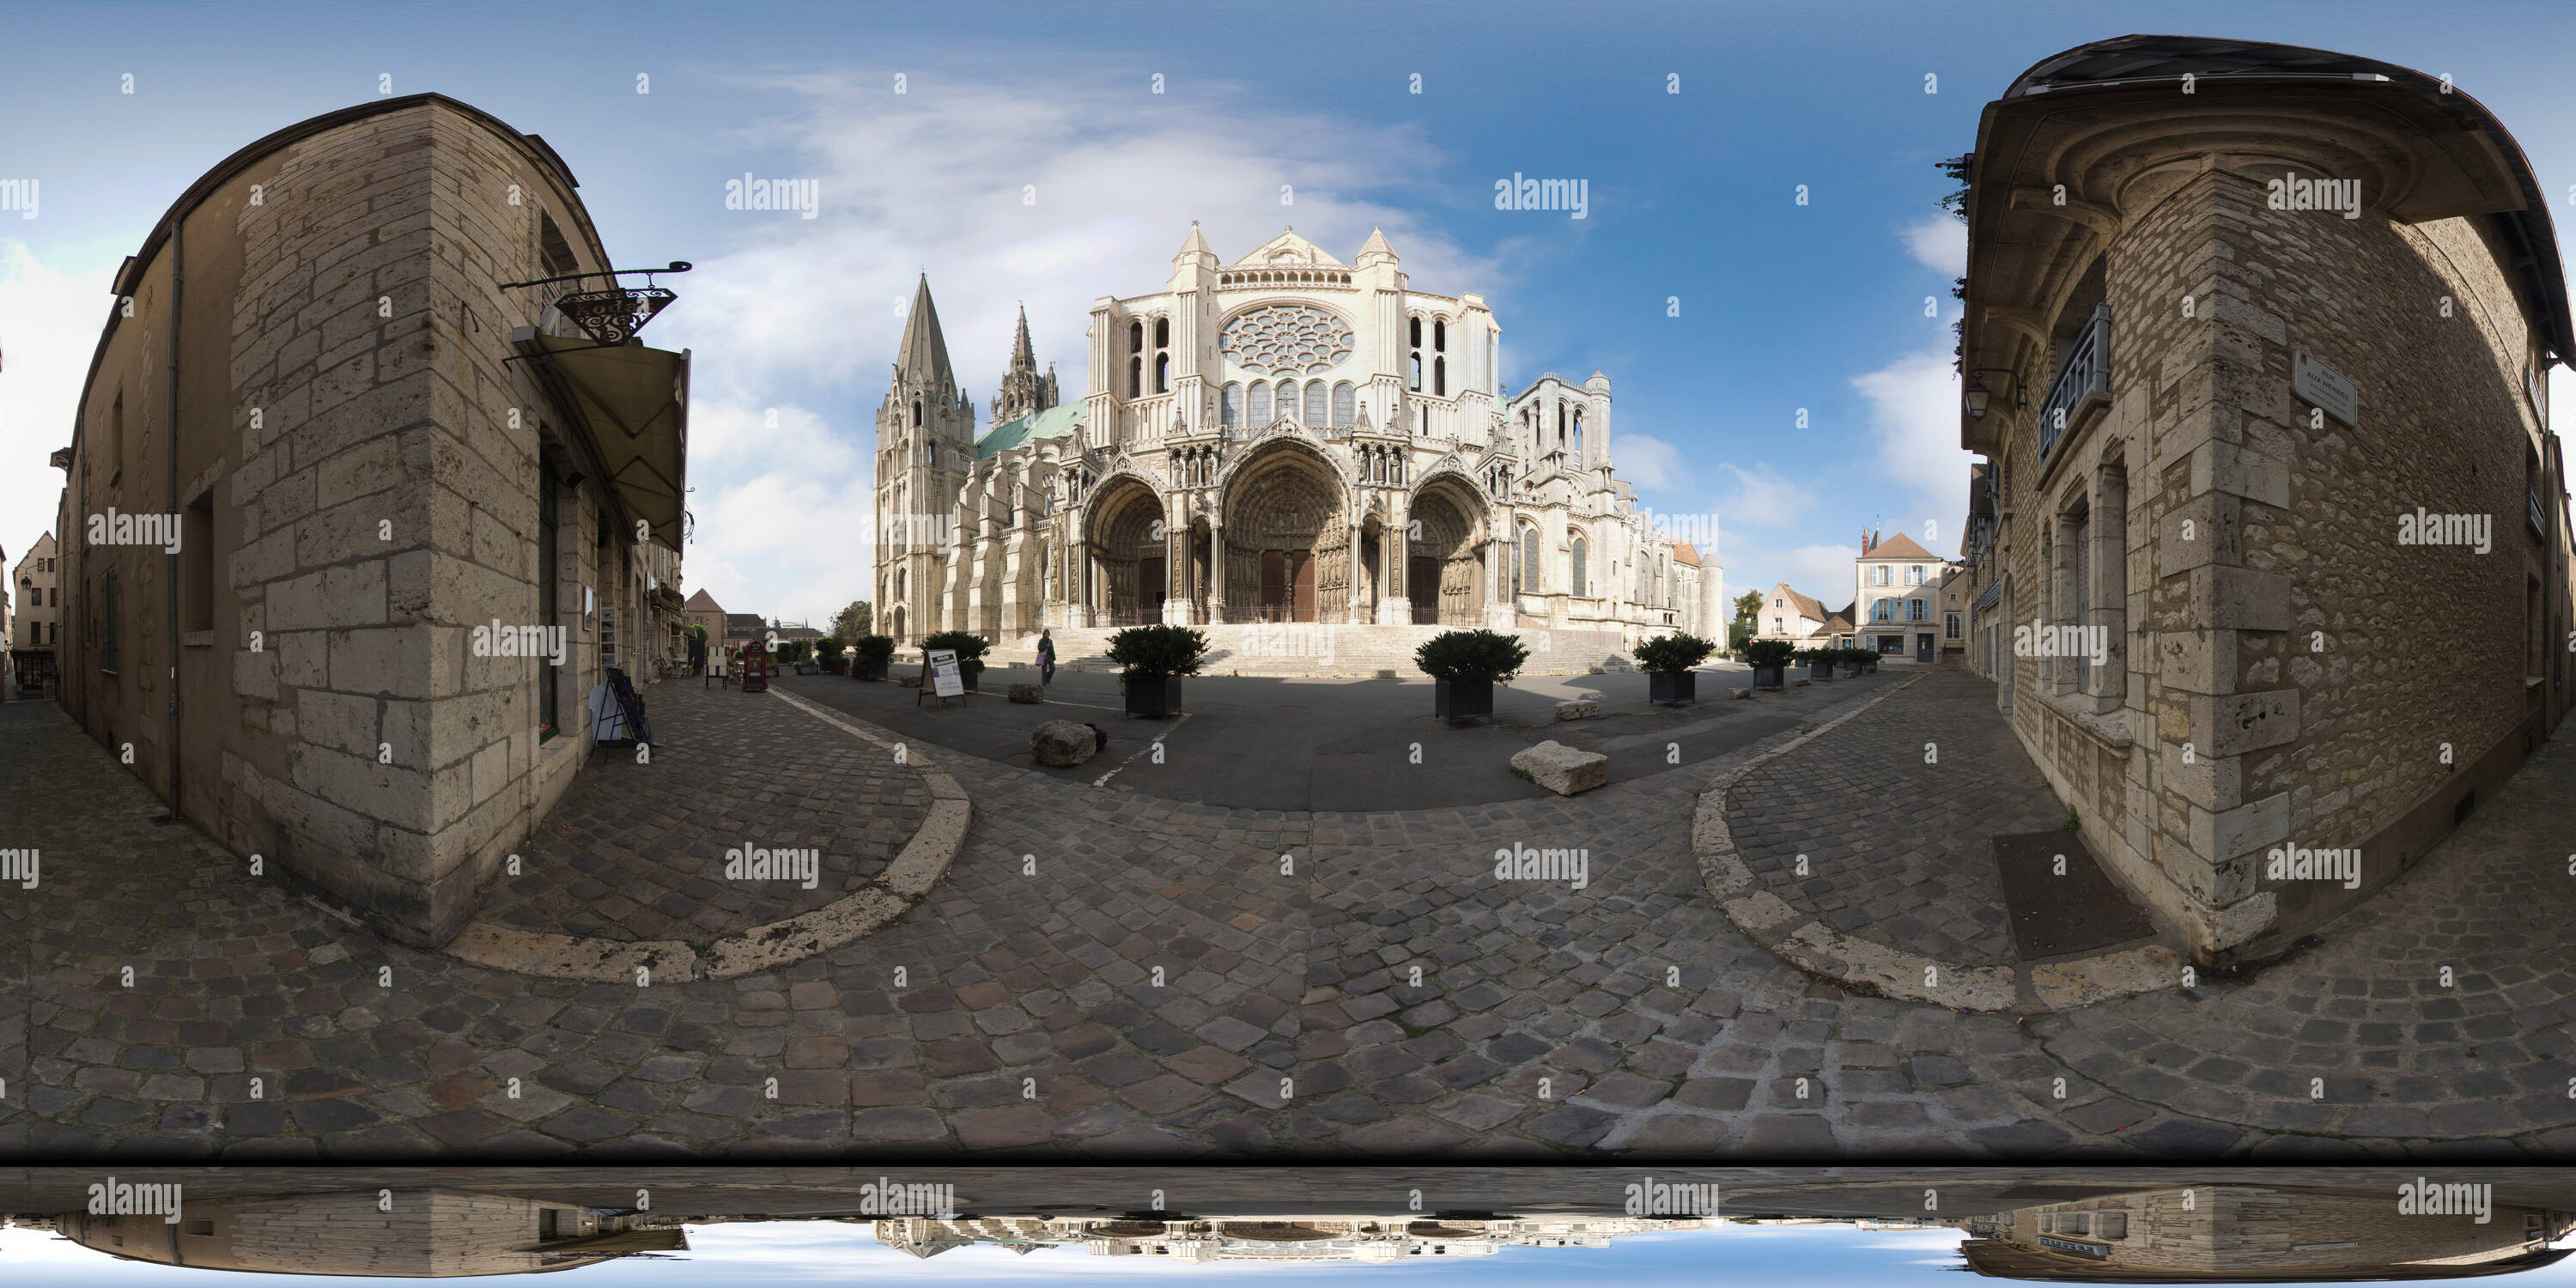 360 degree panoramic view of Cathédrale Notre-Dame de Chartres (Southern Facade), 2016-10, freehand